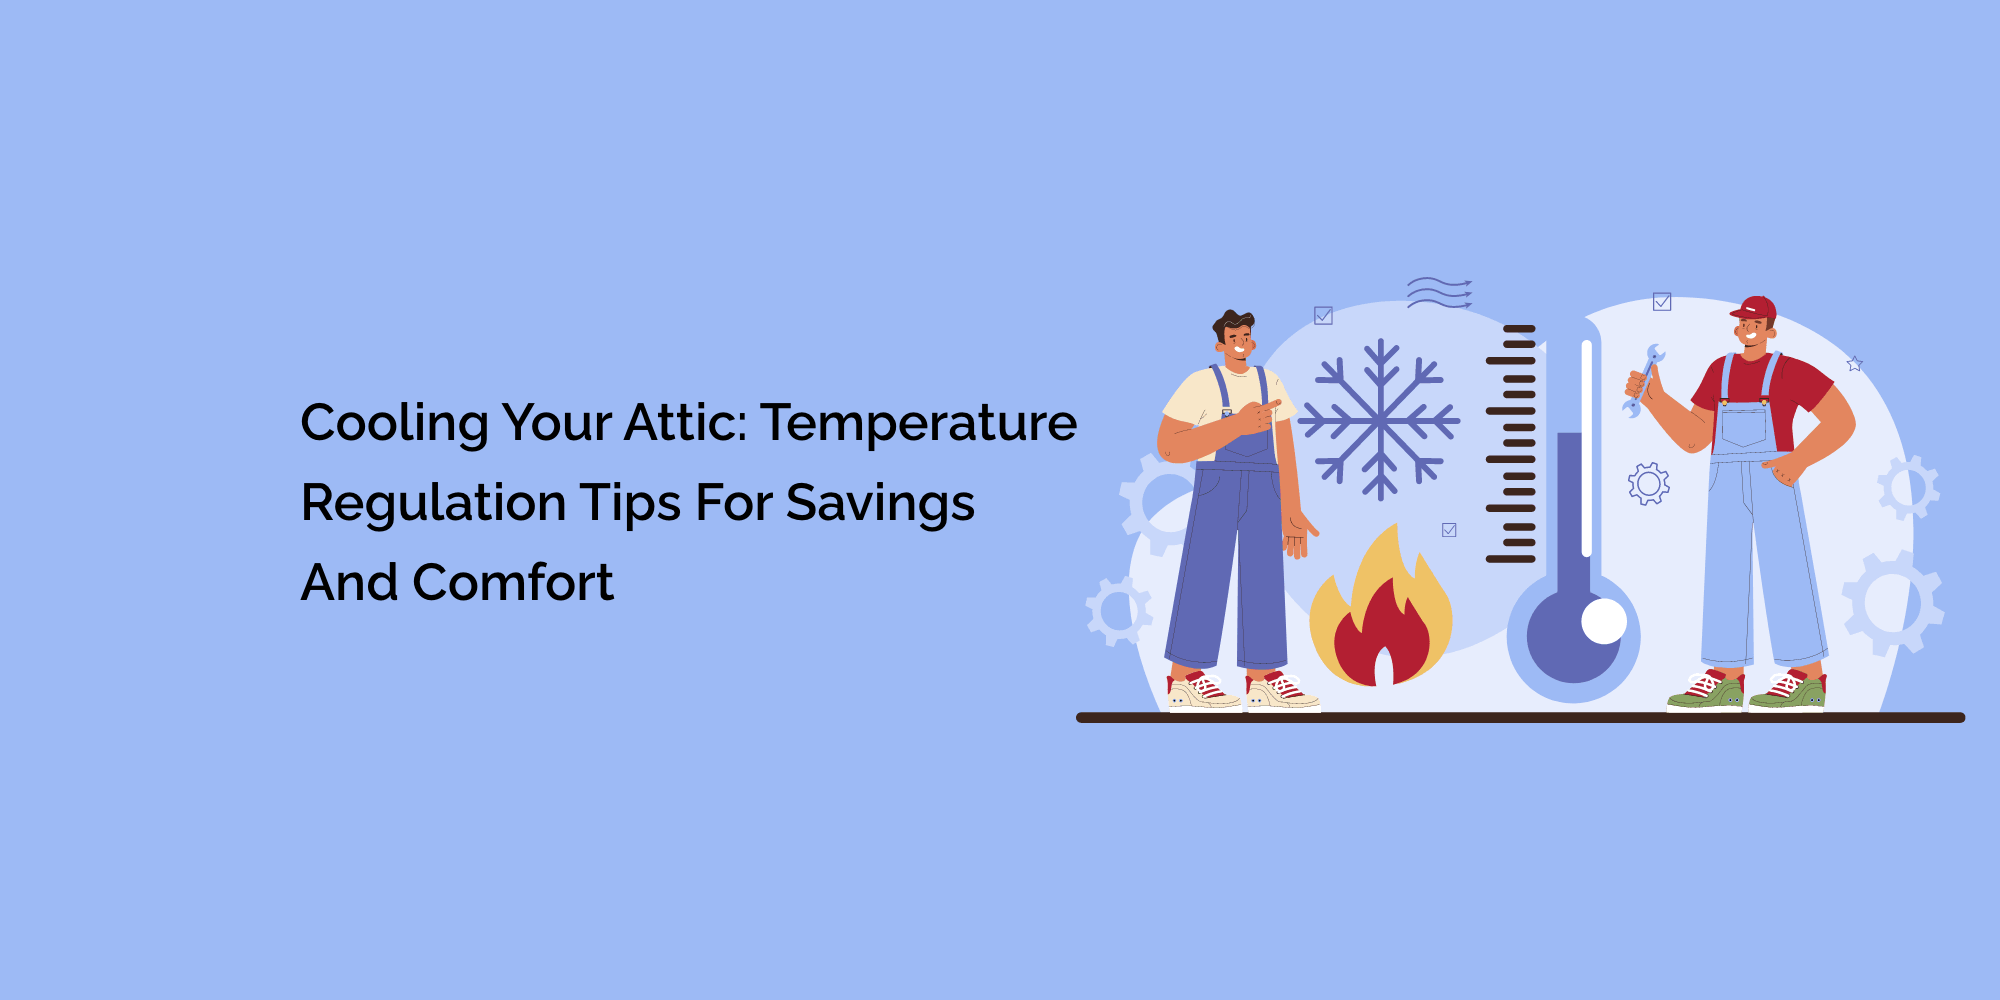 Cooling Your Attic: Temperature Regulation Tips for Savings and Comfort